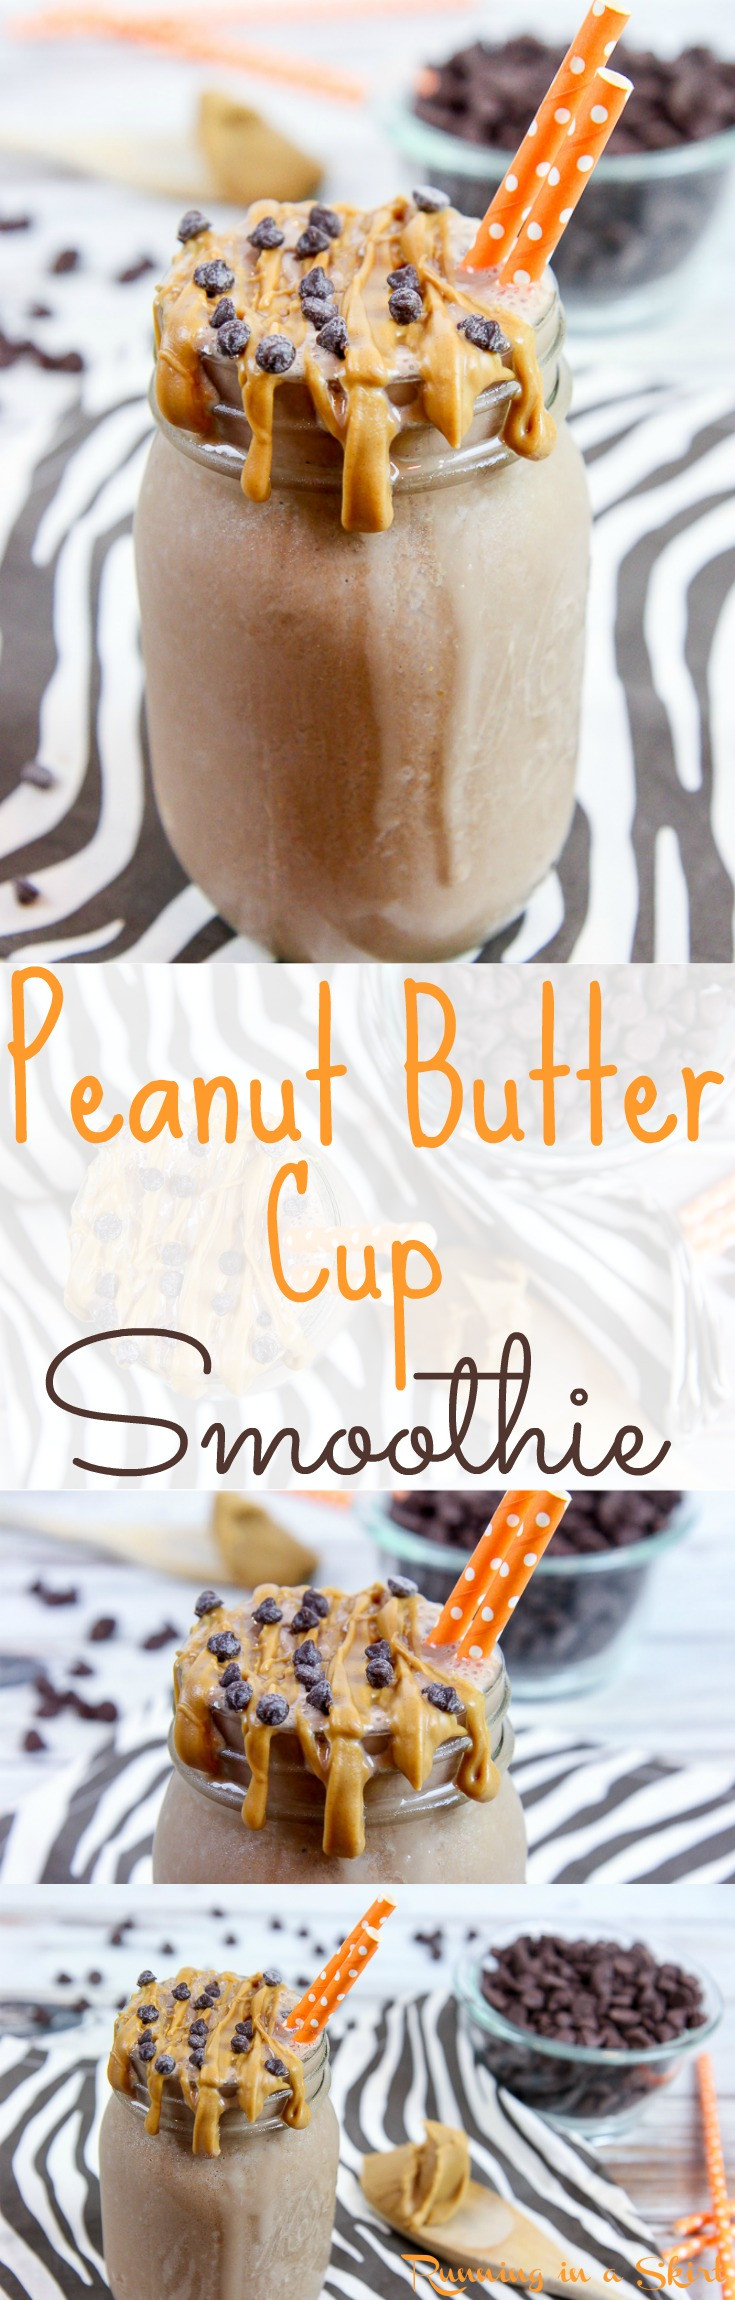 Peanut Butter Smoothie Recipes
 Peanut Butter Cup Smoothie recipe